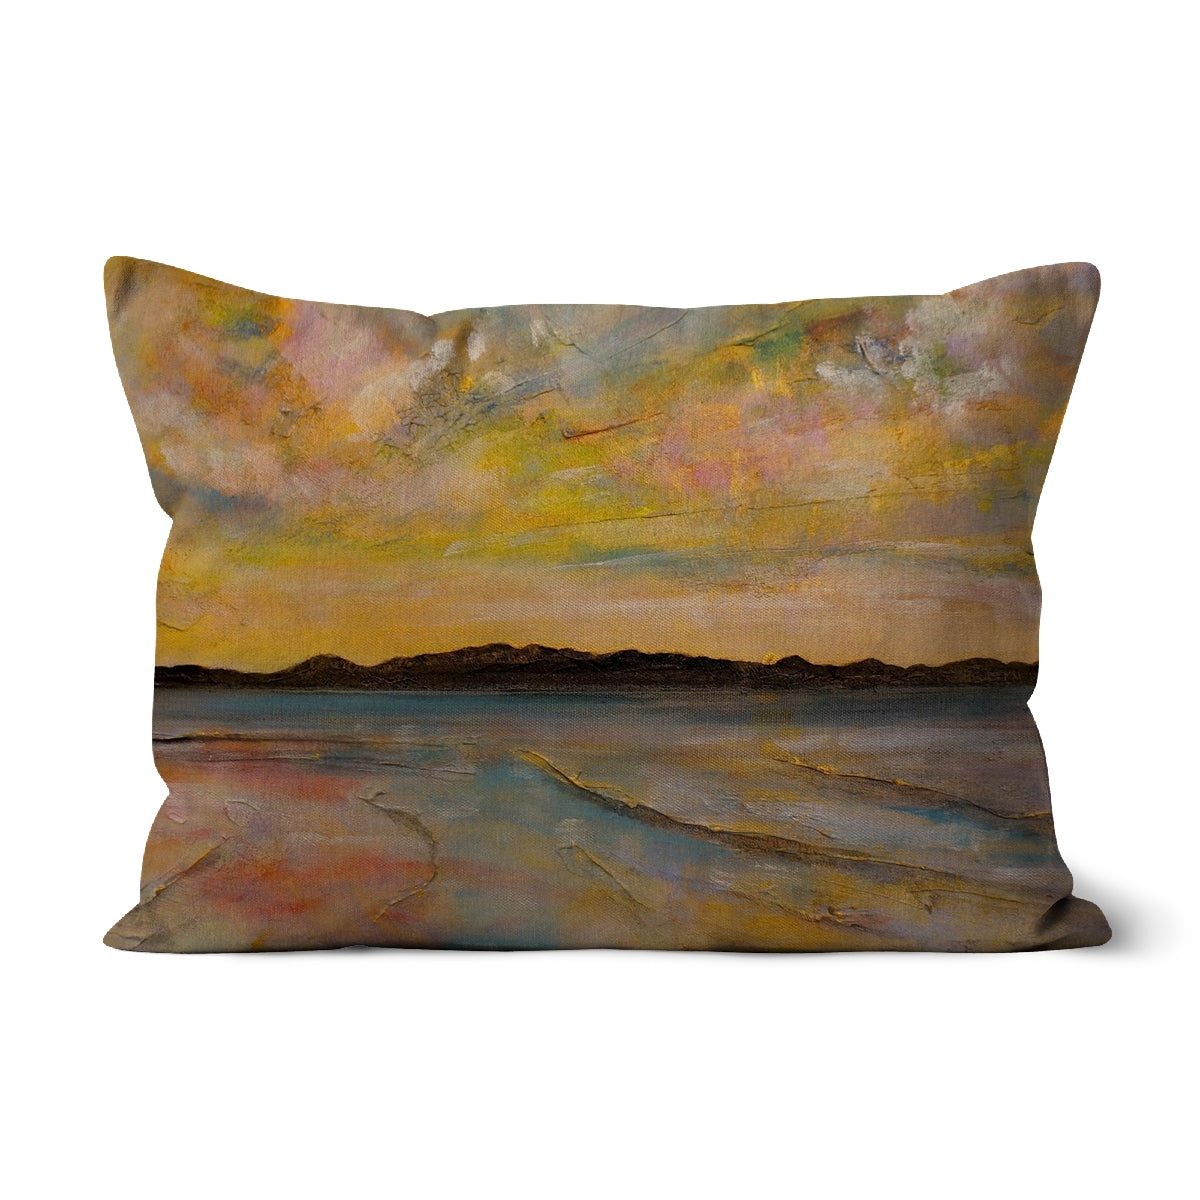 Vallay Island North Uist Art Gifts Cushion-Cushions-Hebridean Islands Art Gallery-Linen-19"x13"-Paintings, Prints, Homeware, Art Gifts From Scotland By Scottish Artist Kevin Hunter